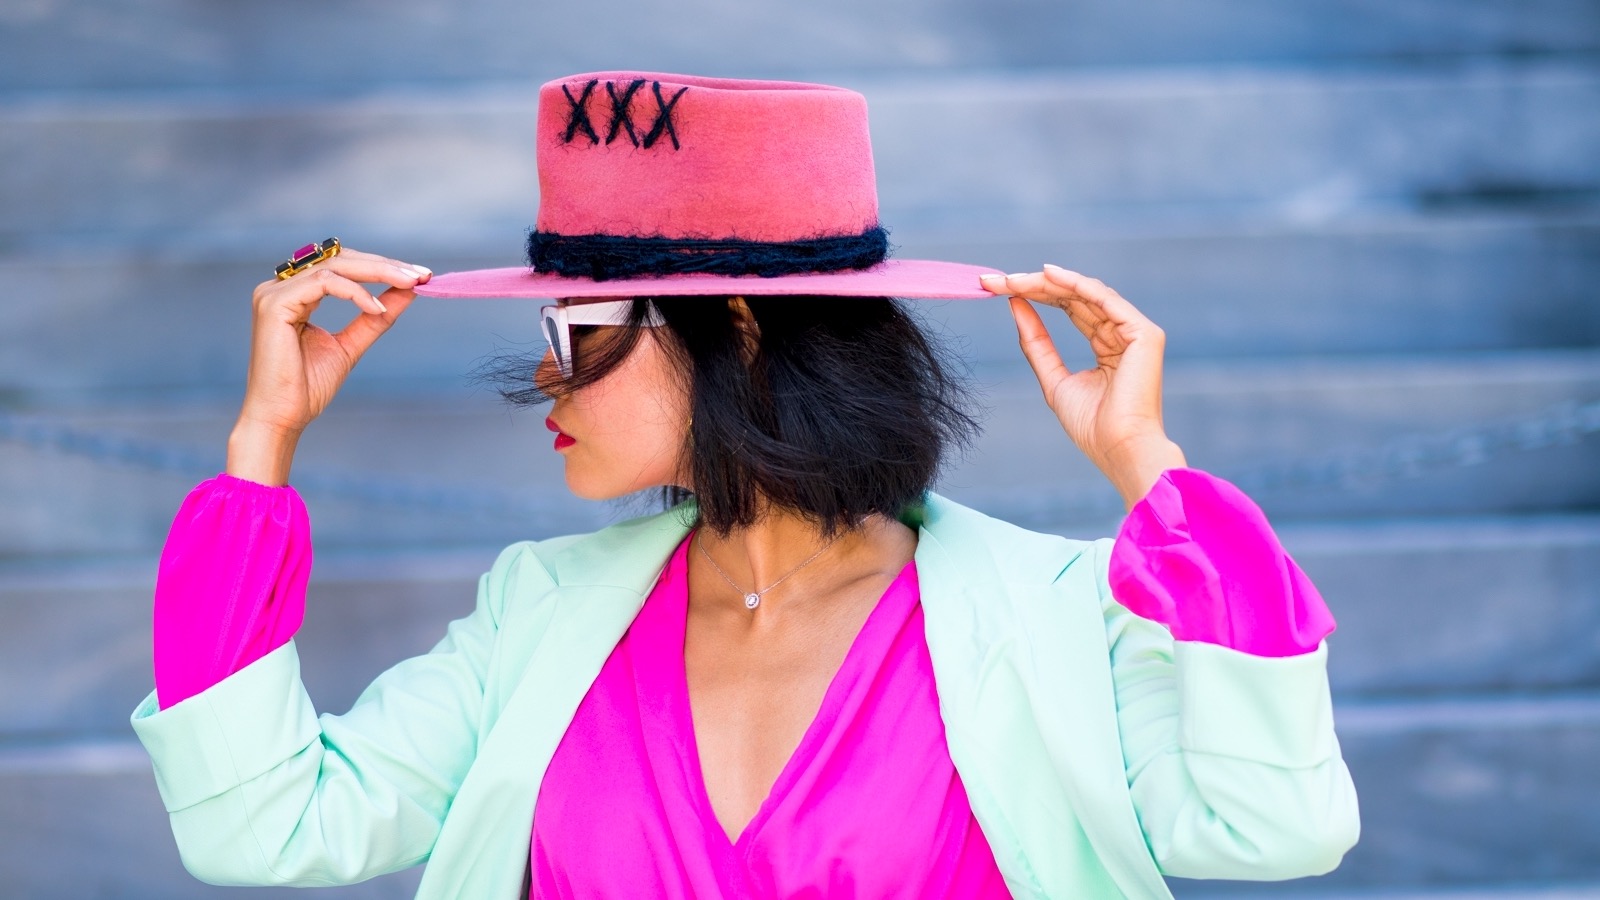 Black in Business: Featured The Pretty Girls Like Hat Design of Herbin Co.